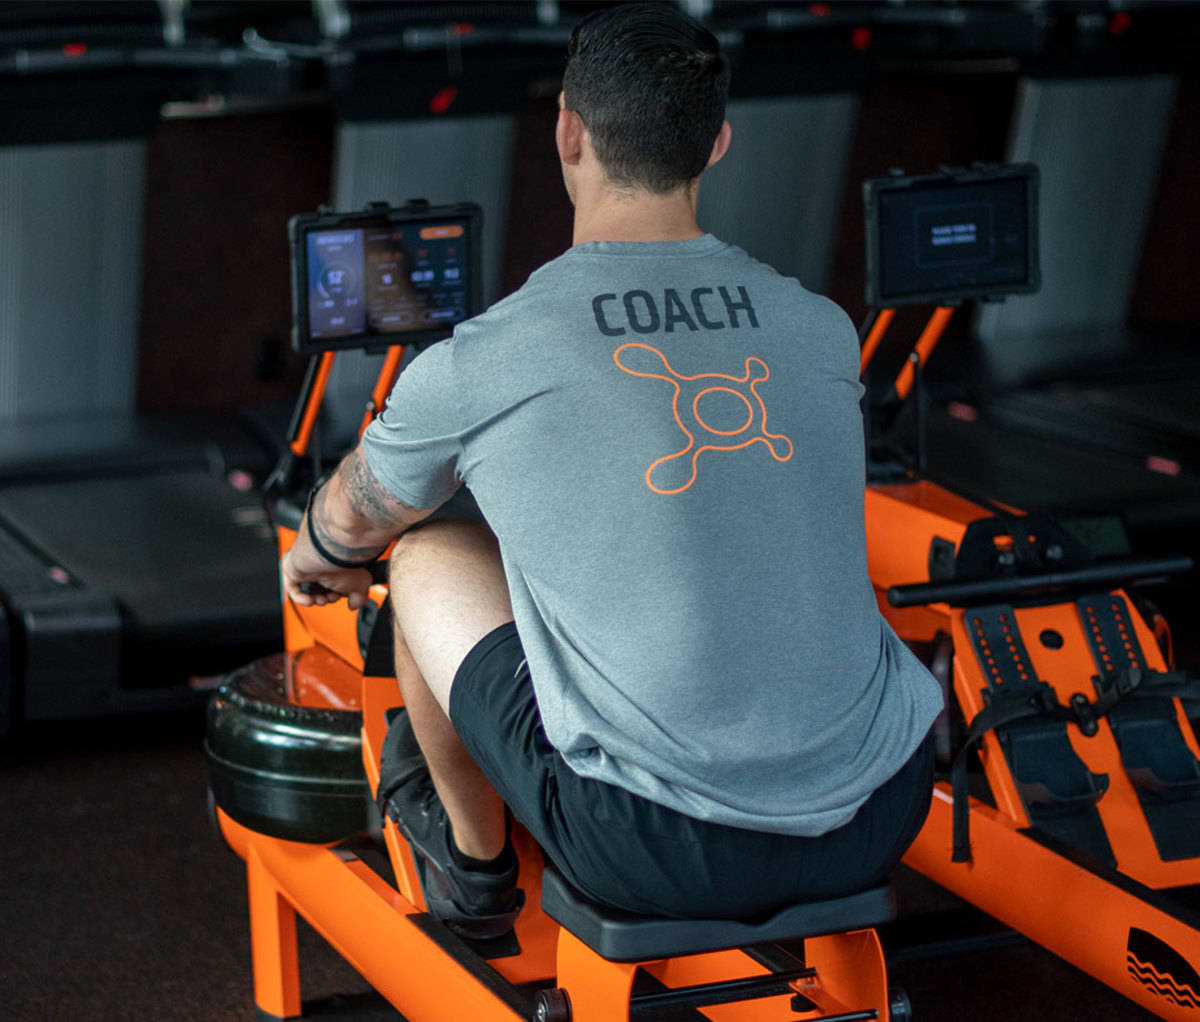 How to Recreate a Fat-Burning Orangetheory Workout at Your Local